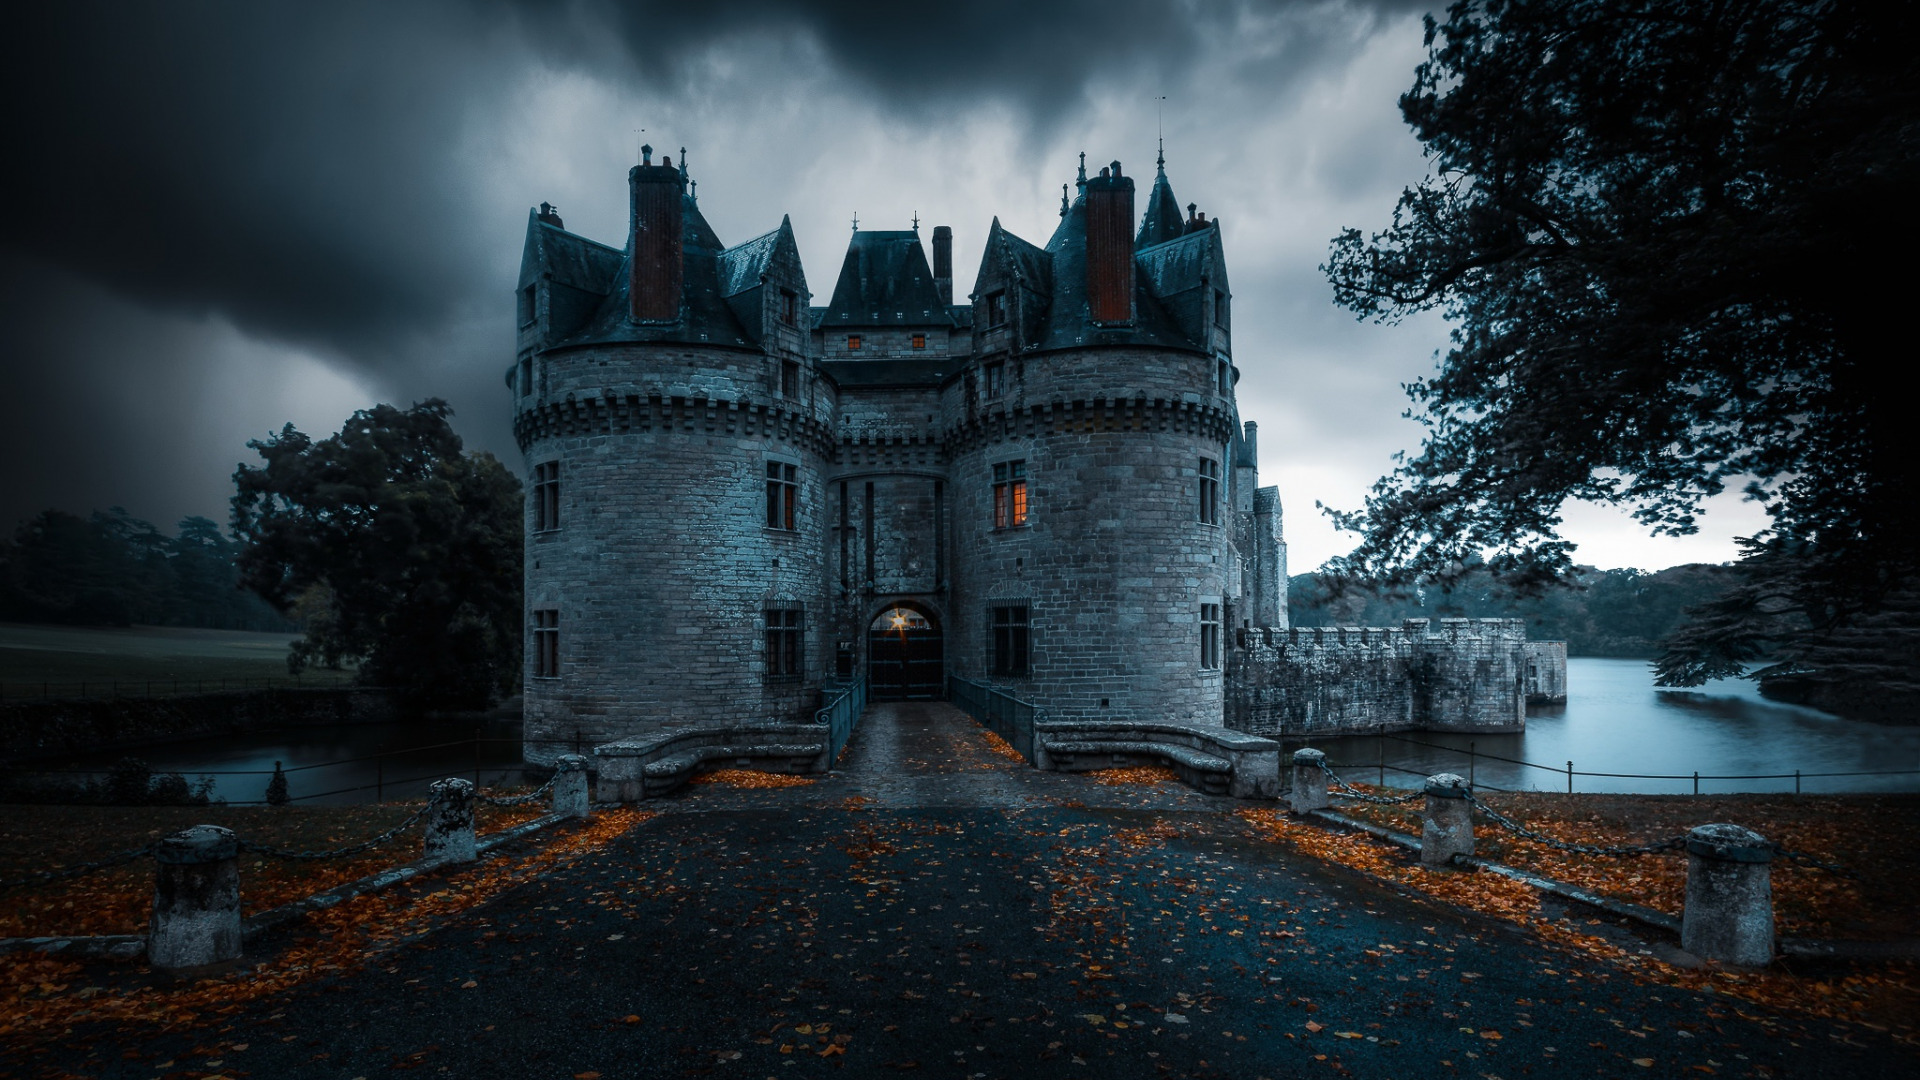 General 1920x1080 architecture castle France ancient dark lake trees fall fallen leaves evening clouds overcast low light